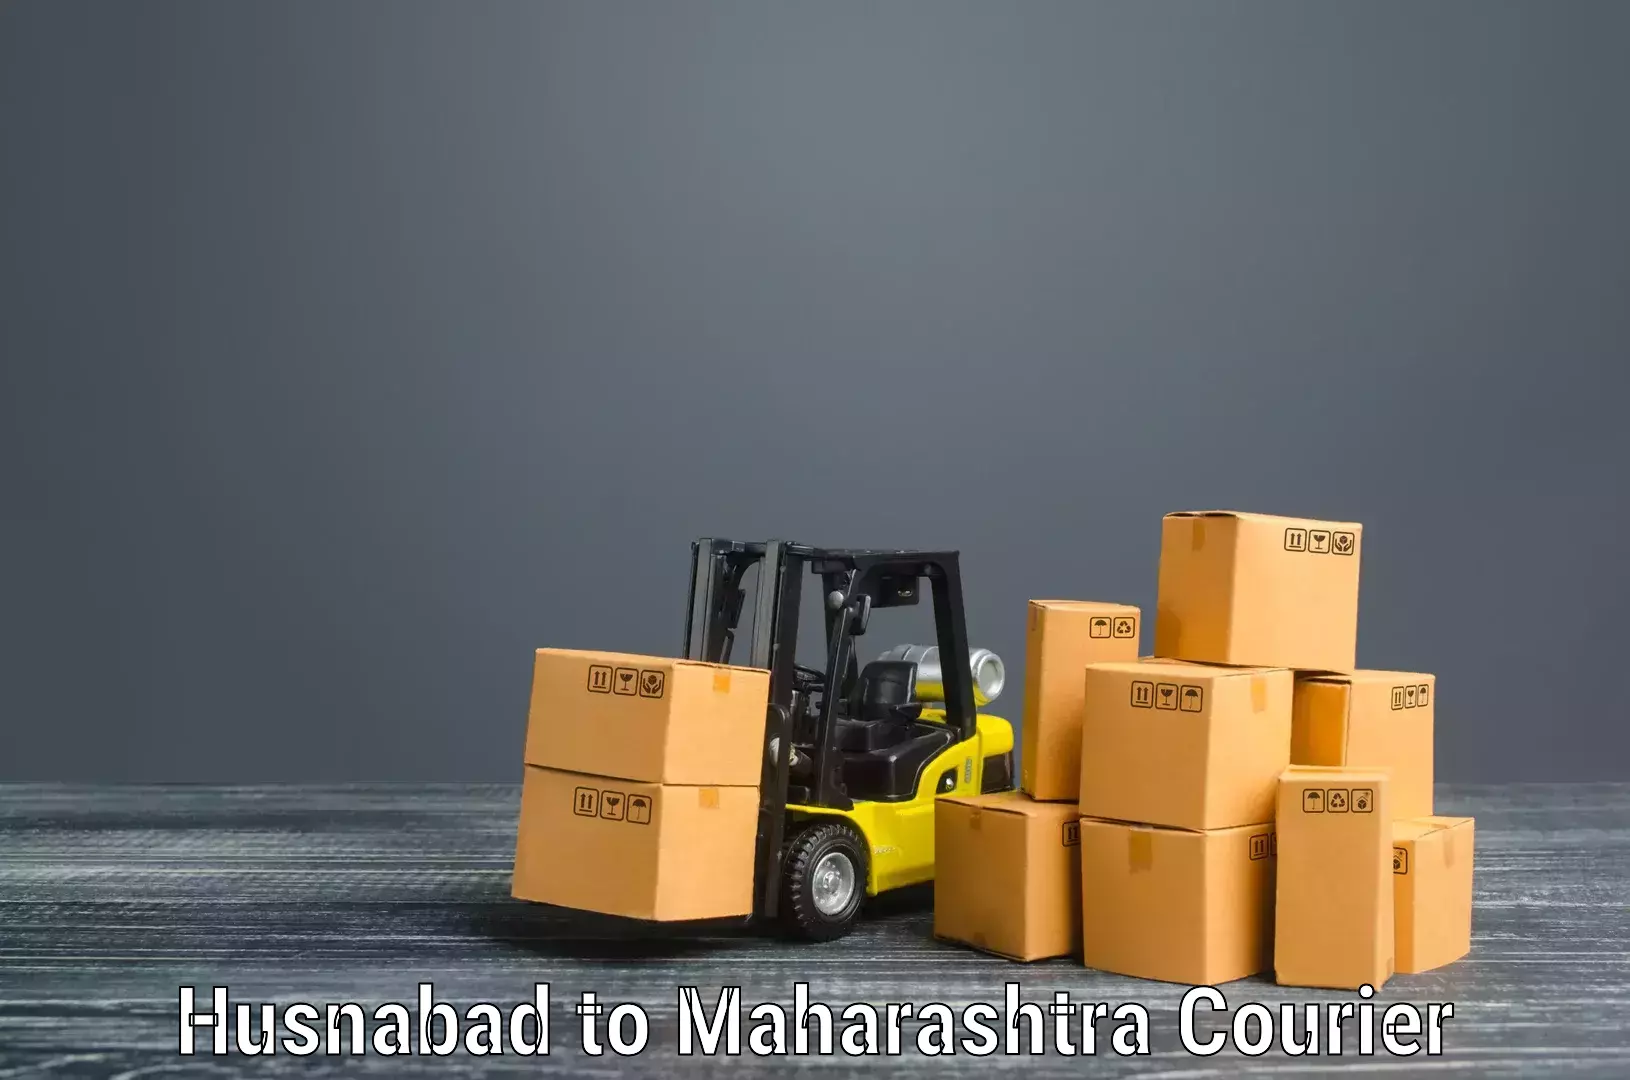 Furniture transport company Husnabad to Dhule